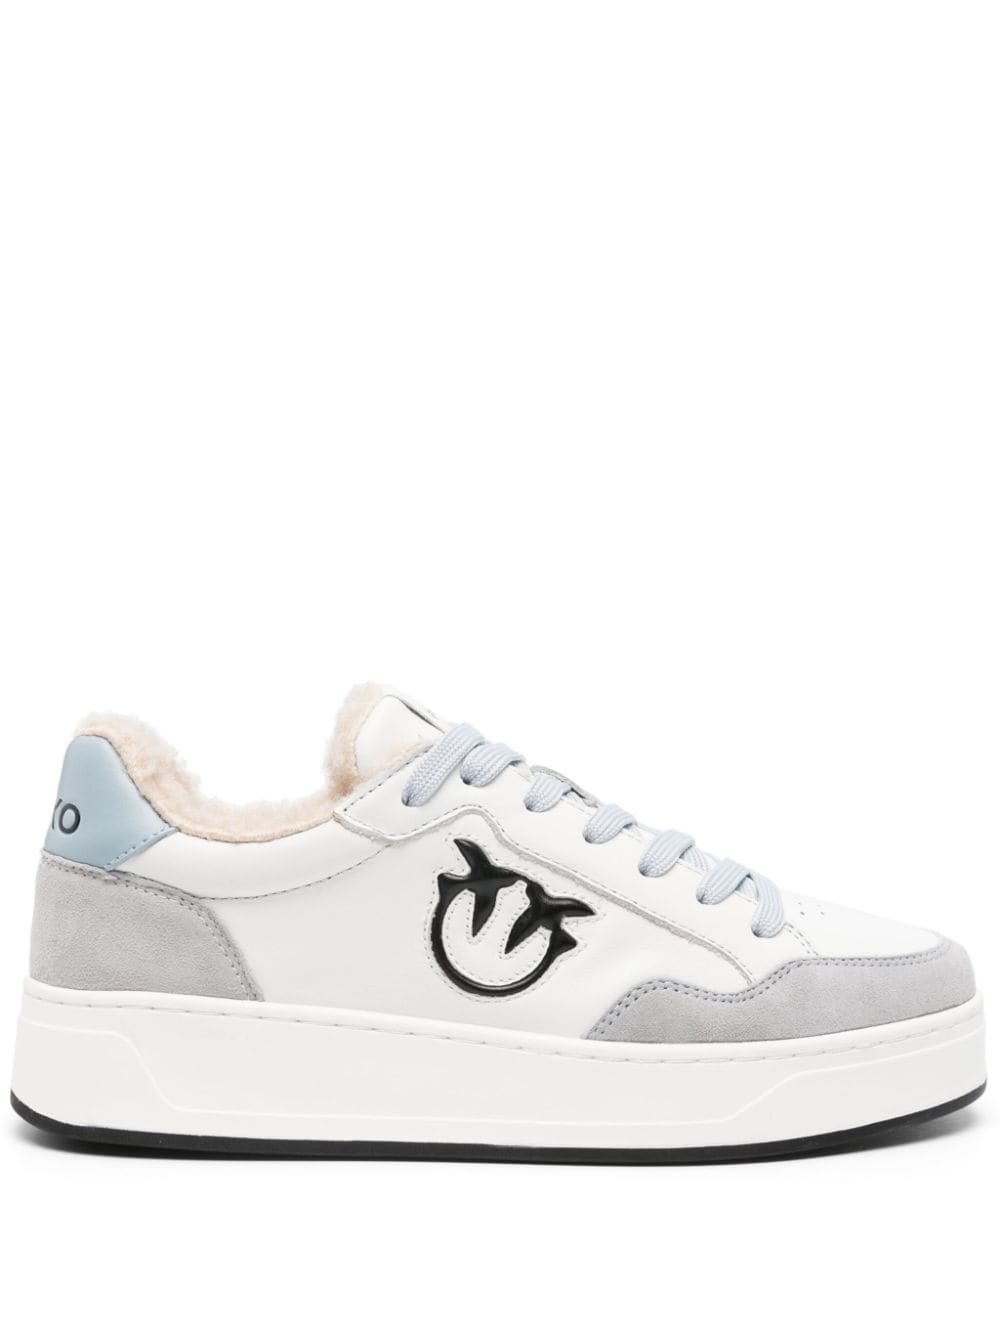 Pinko Bondy 2.0 Leather Trainers In Off White/grey/beige